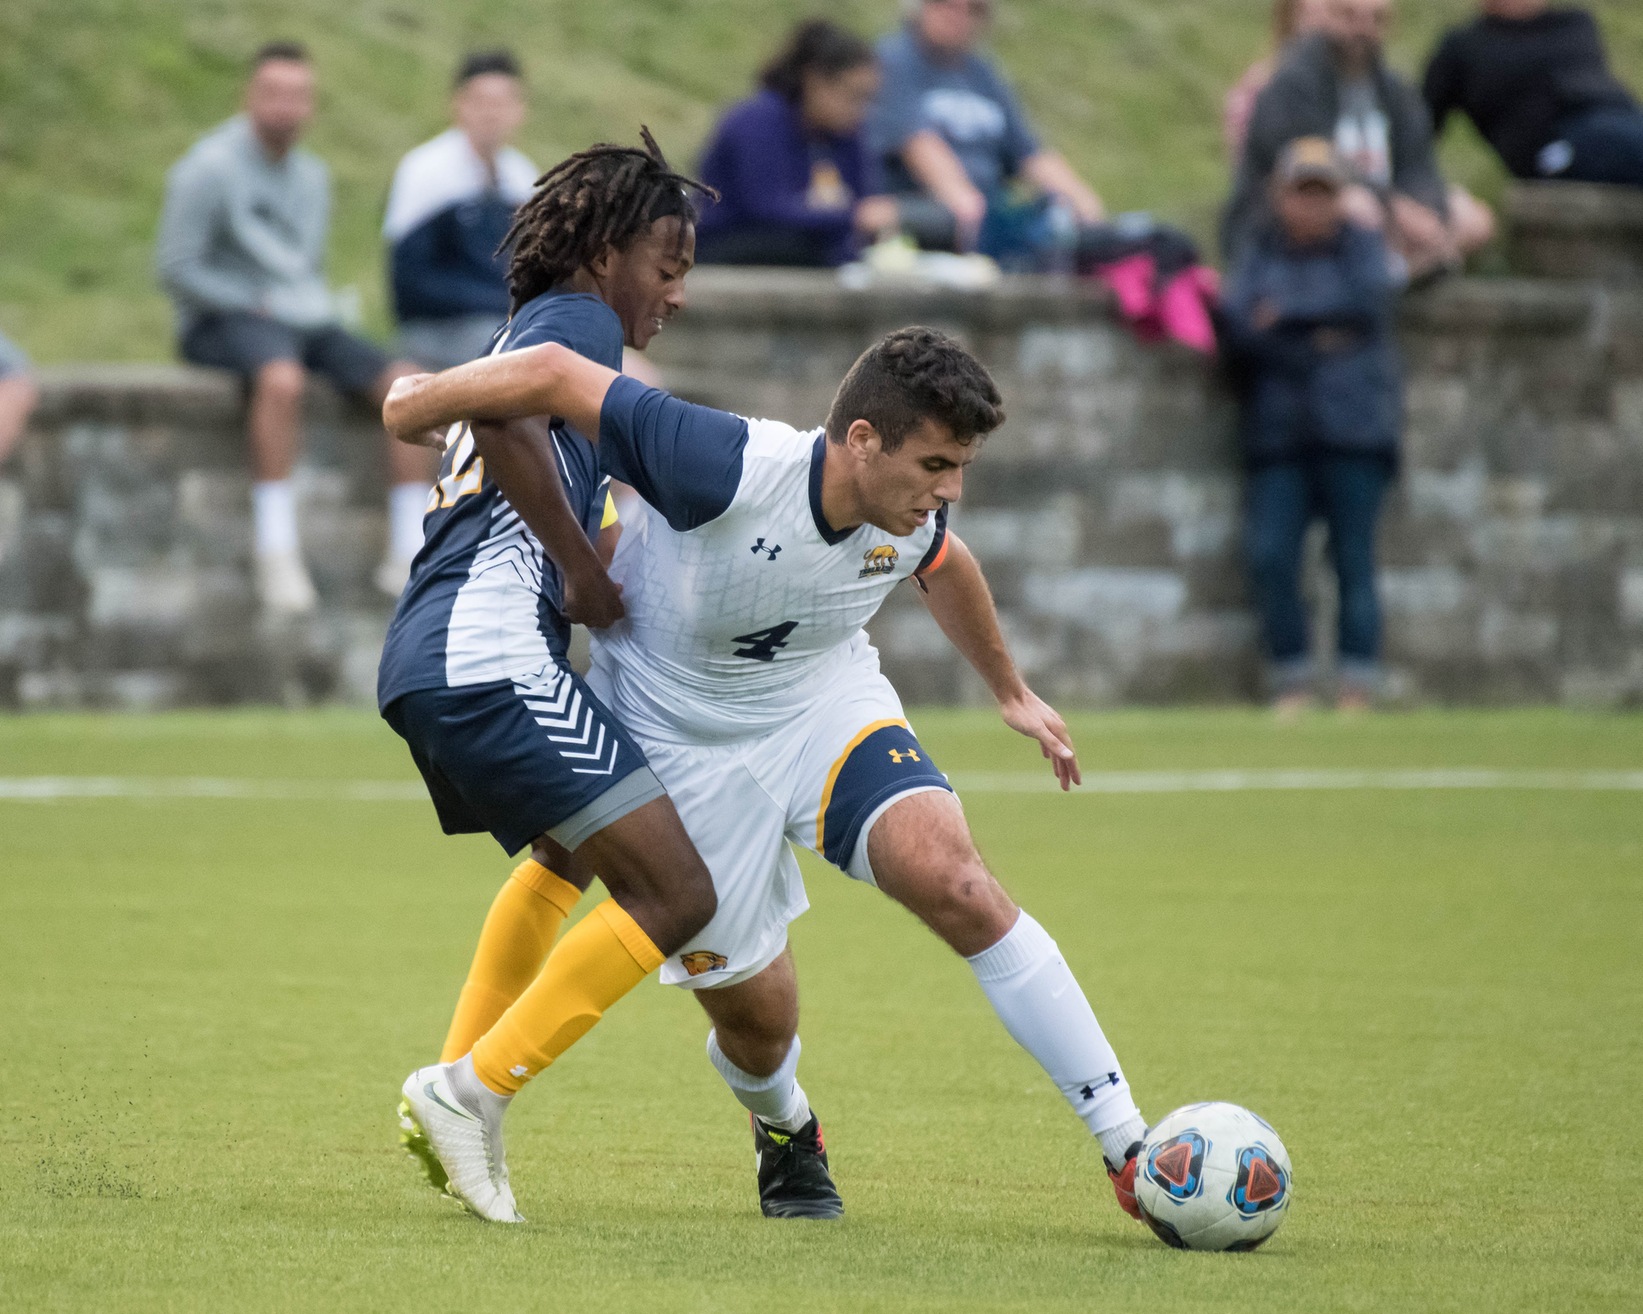 Men's Soccer suffers tough 3-2 decision at Fitchburg State